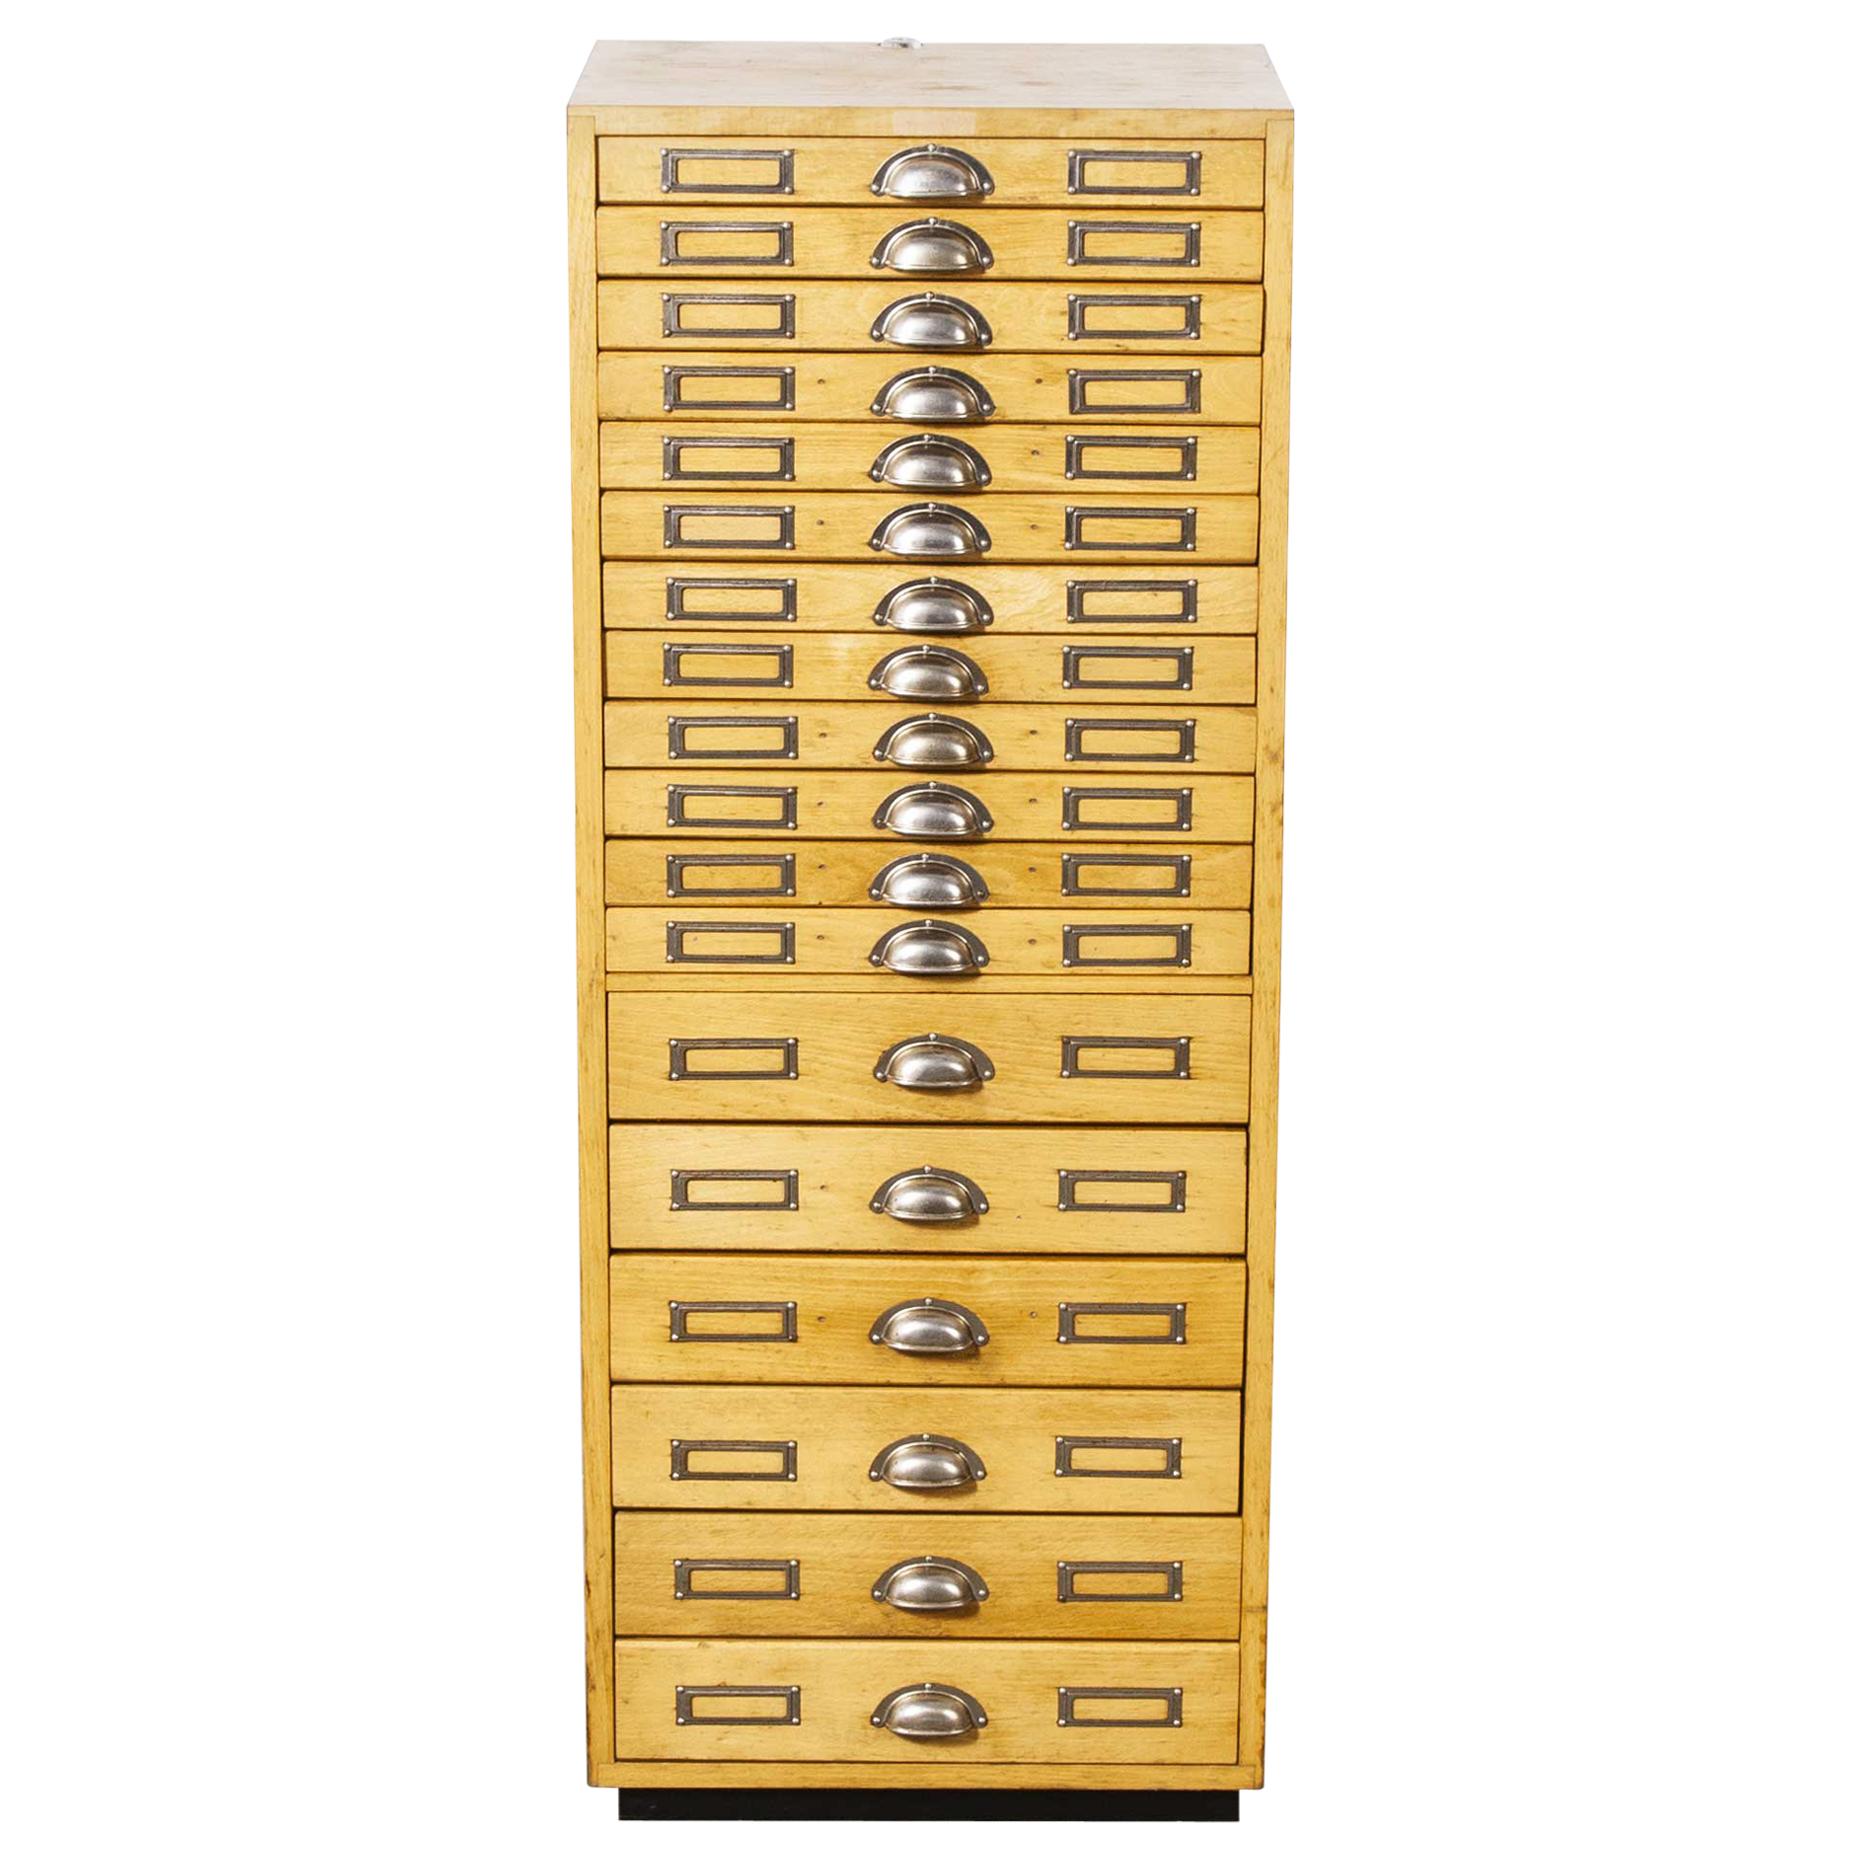 1950s Small Multi-Drawer Jewelers Cabinet, Eighteen Drawers